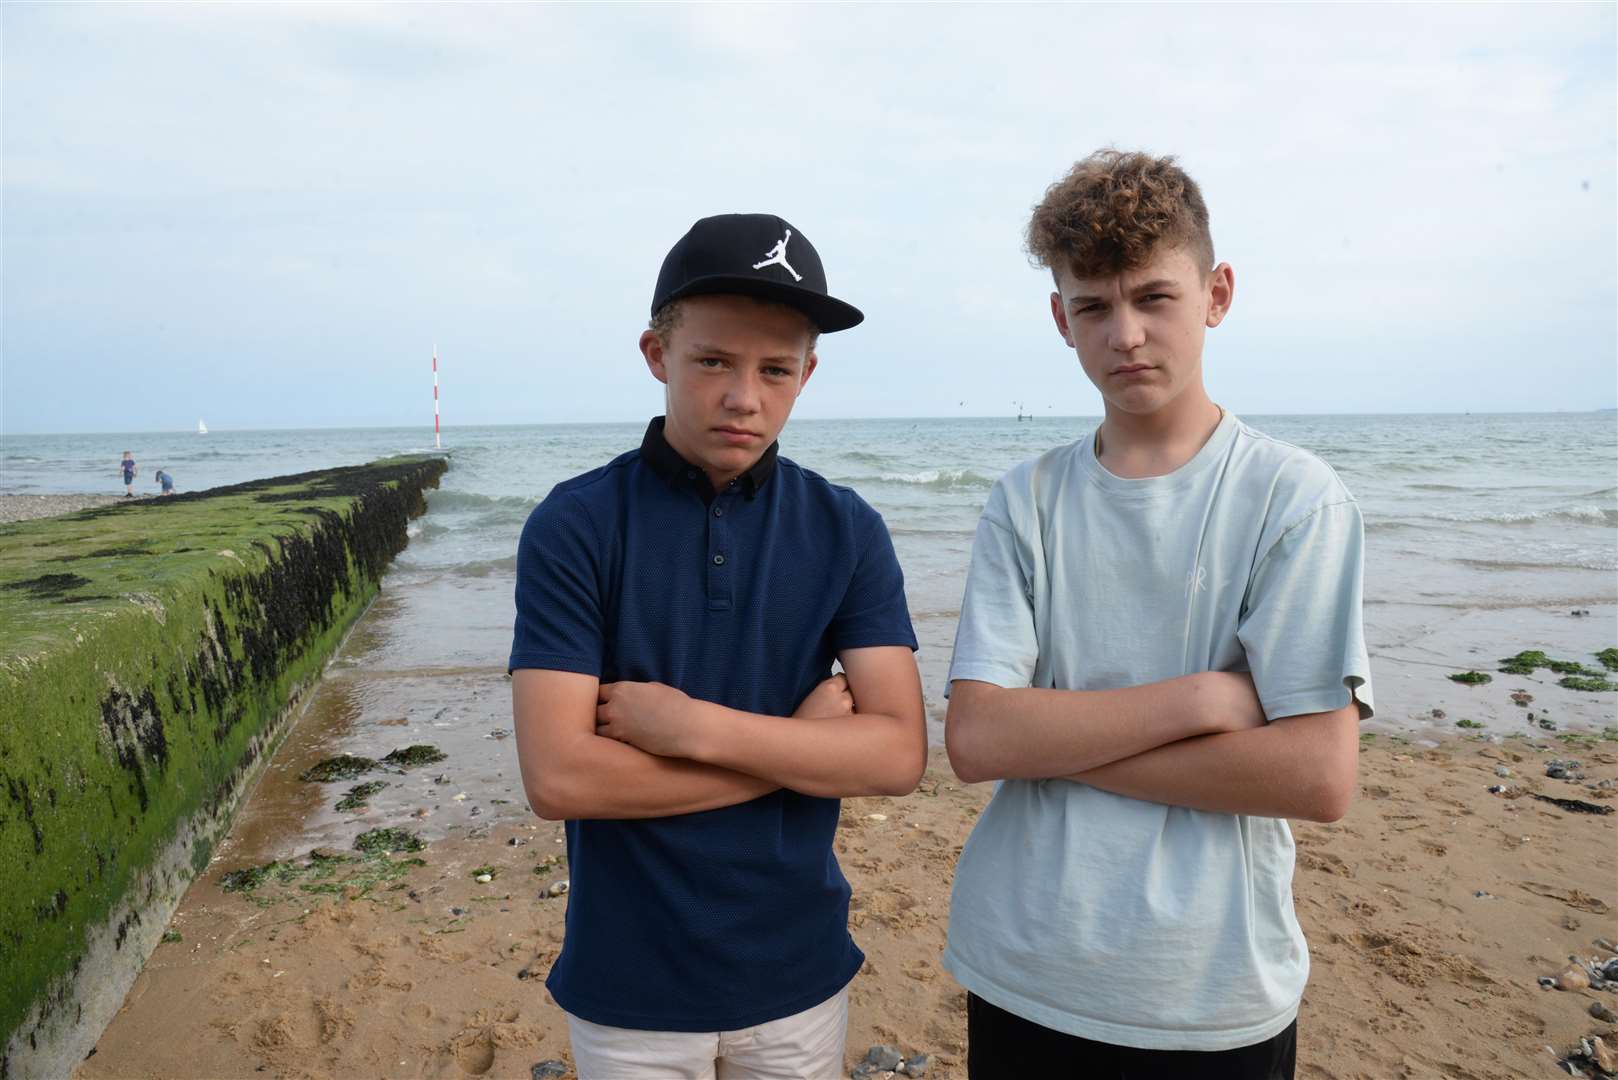 Tyreece Solly, 13 and Cameron Bevis, 14, were helped by a stranger at Marina Esplanade, Ramsgate